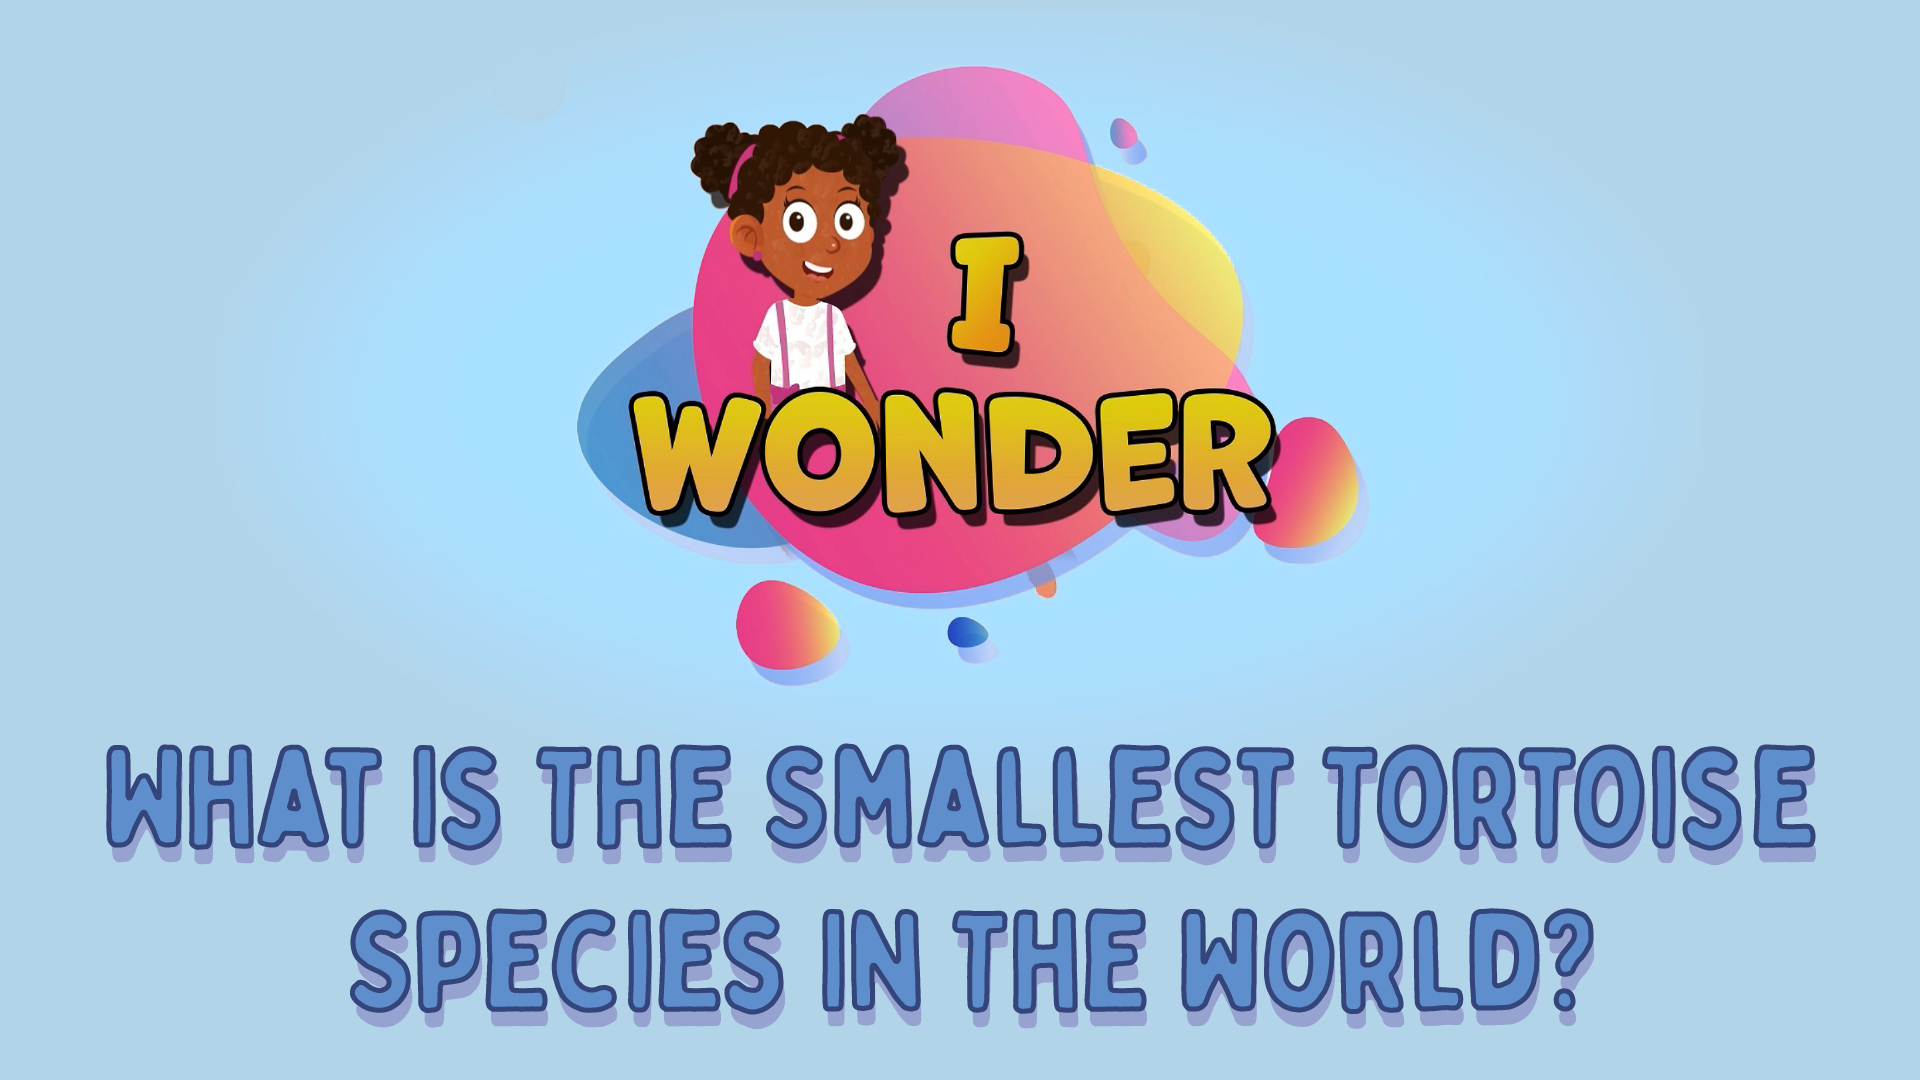 What Is The Smallest Tortoise Species In The World?